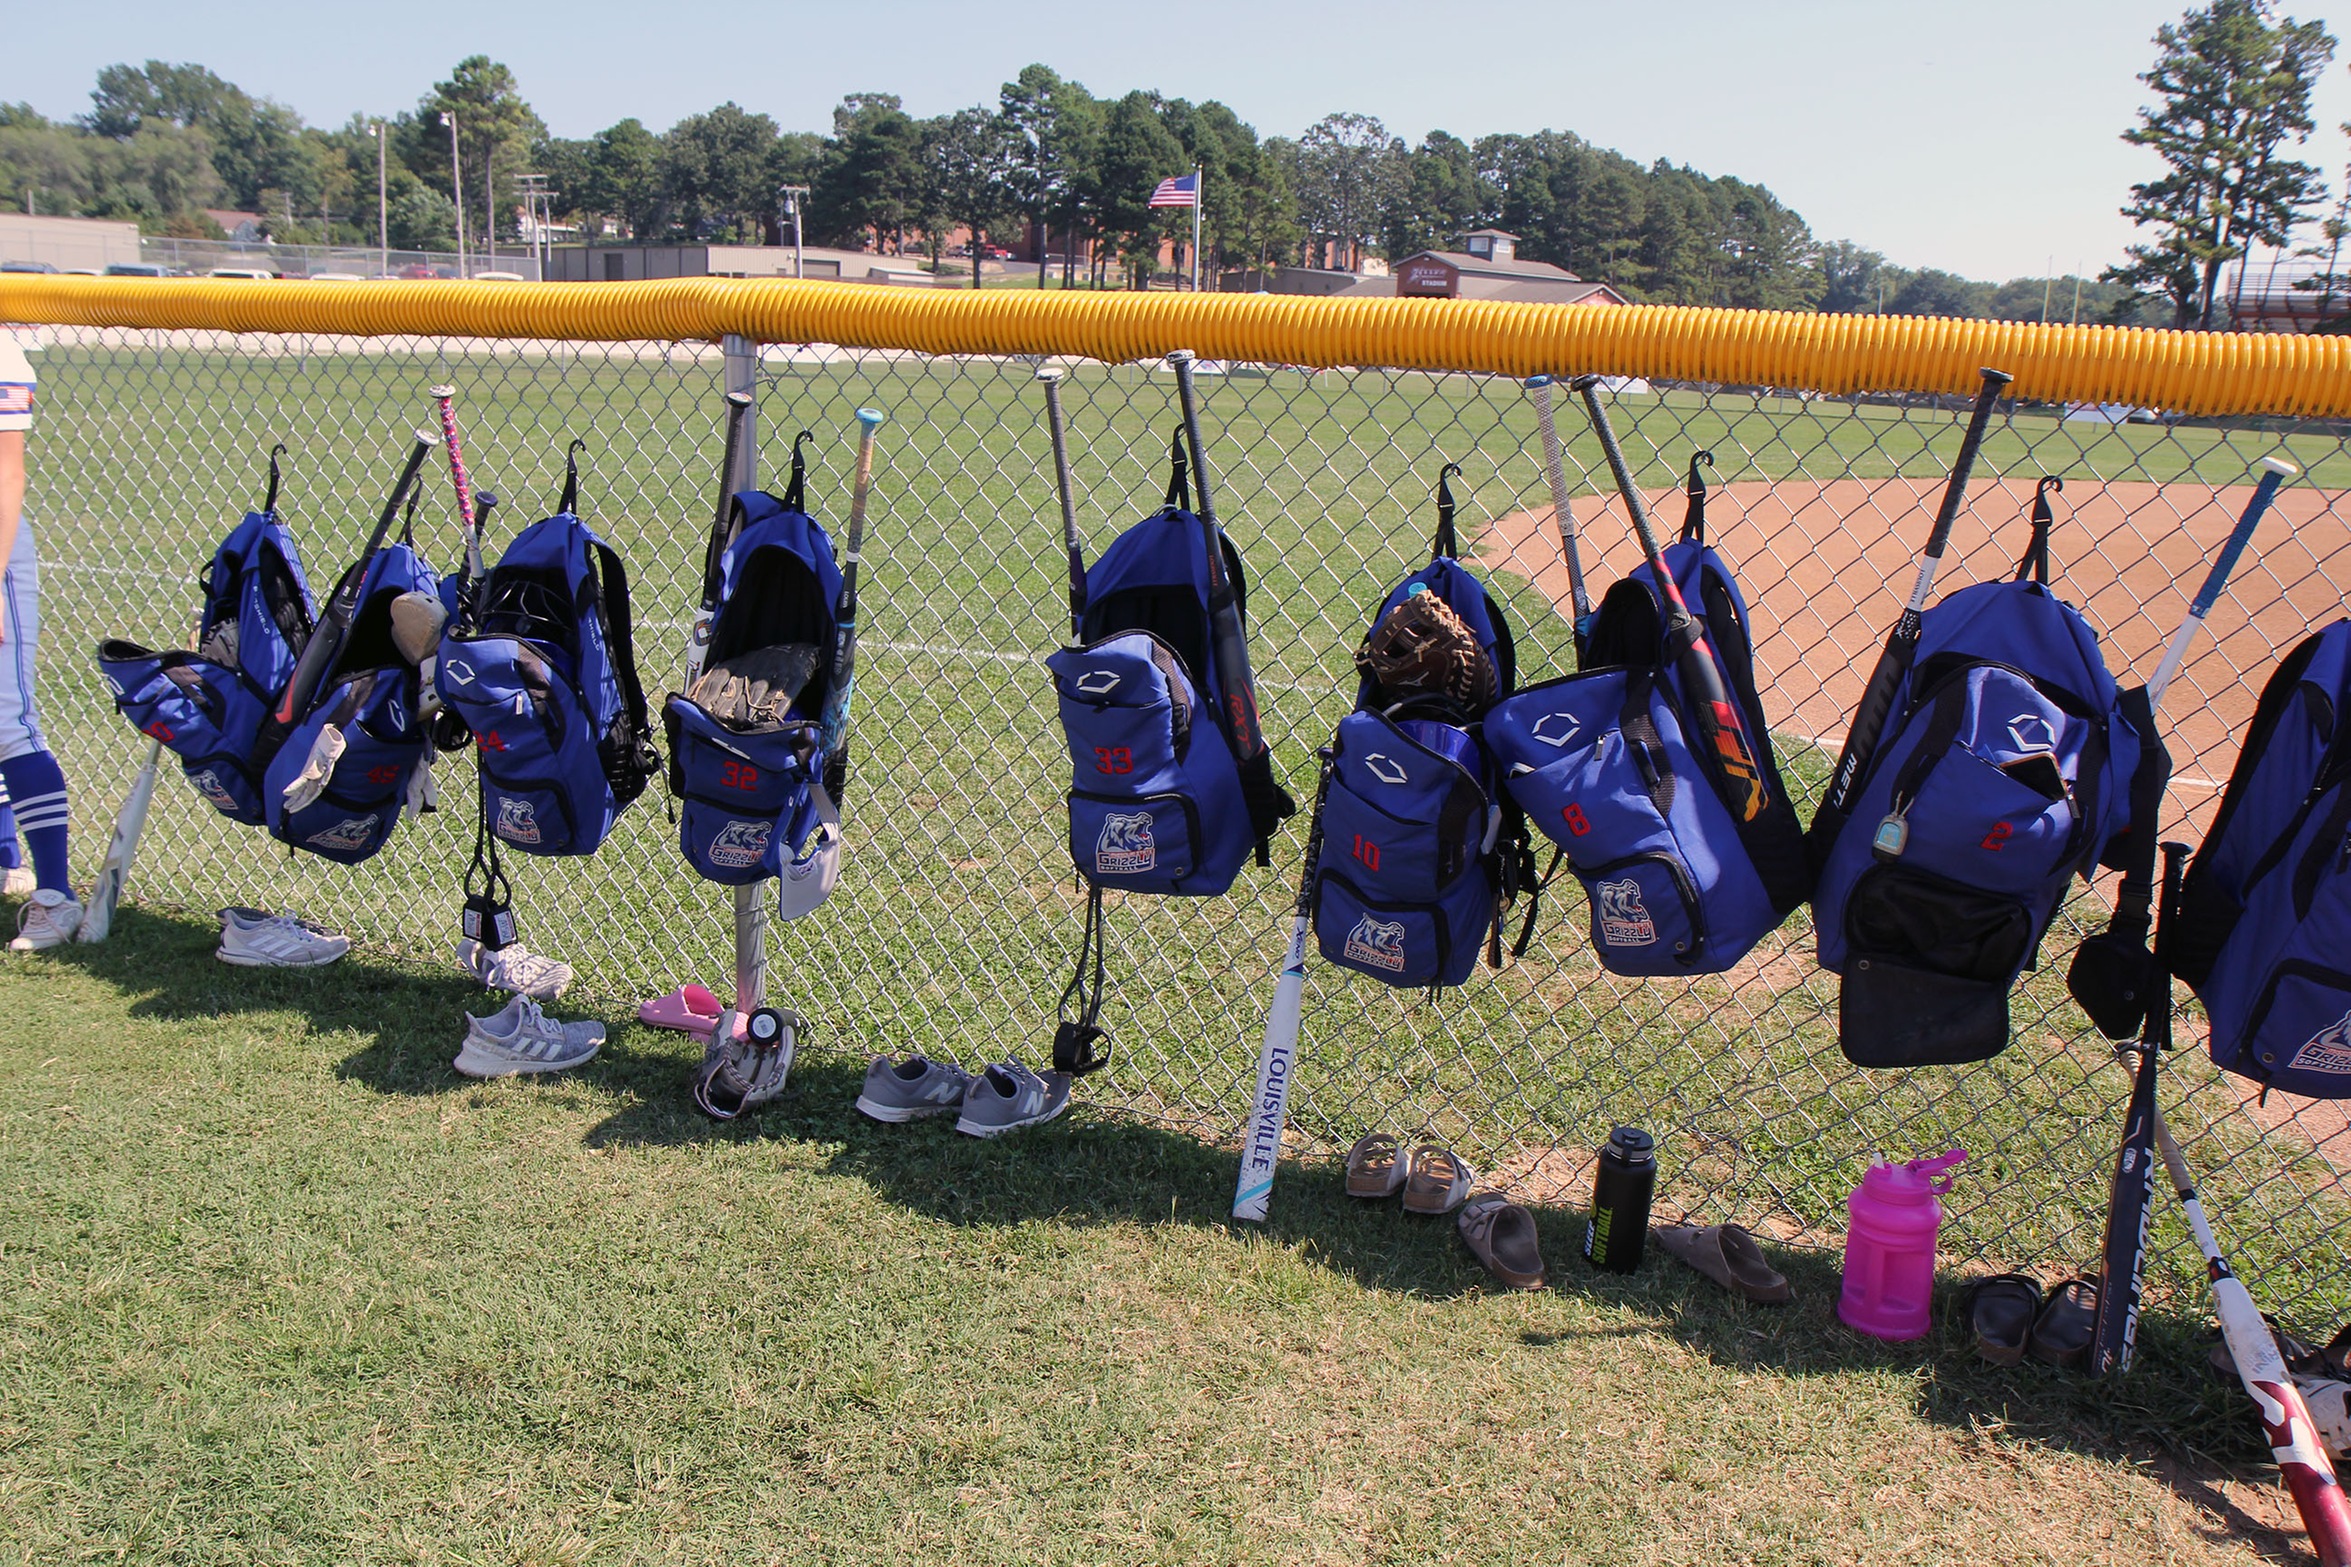 Backpacks filled with softball gear hang on a chainlink fence.